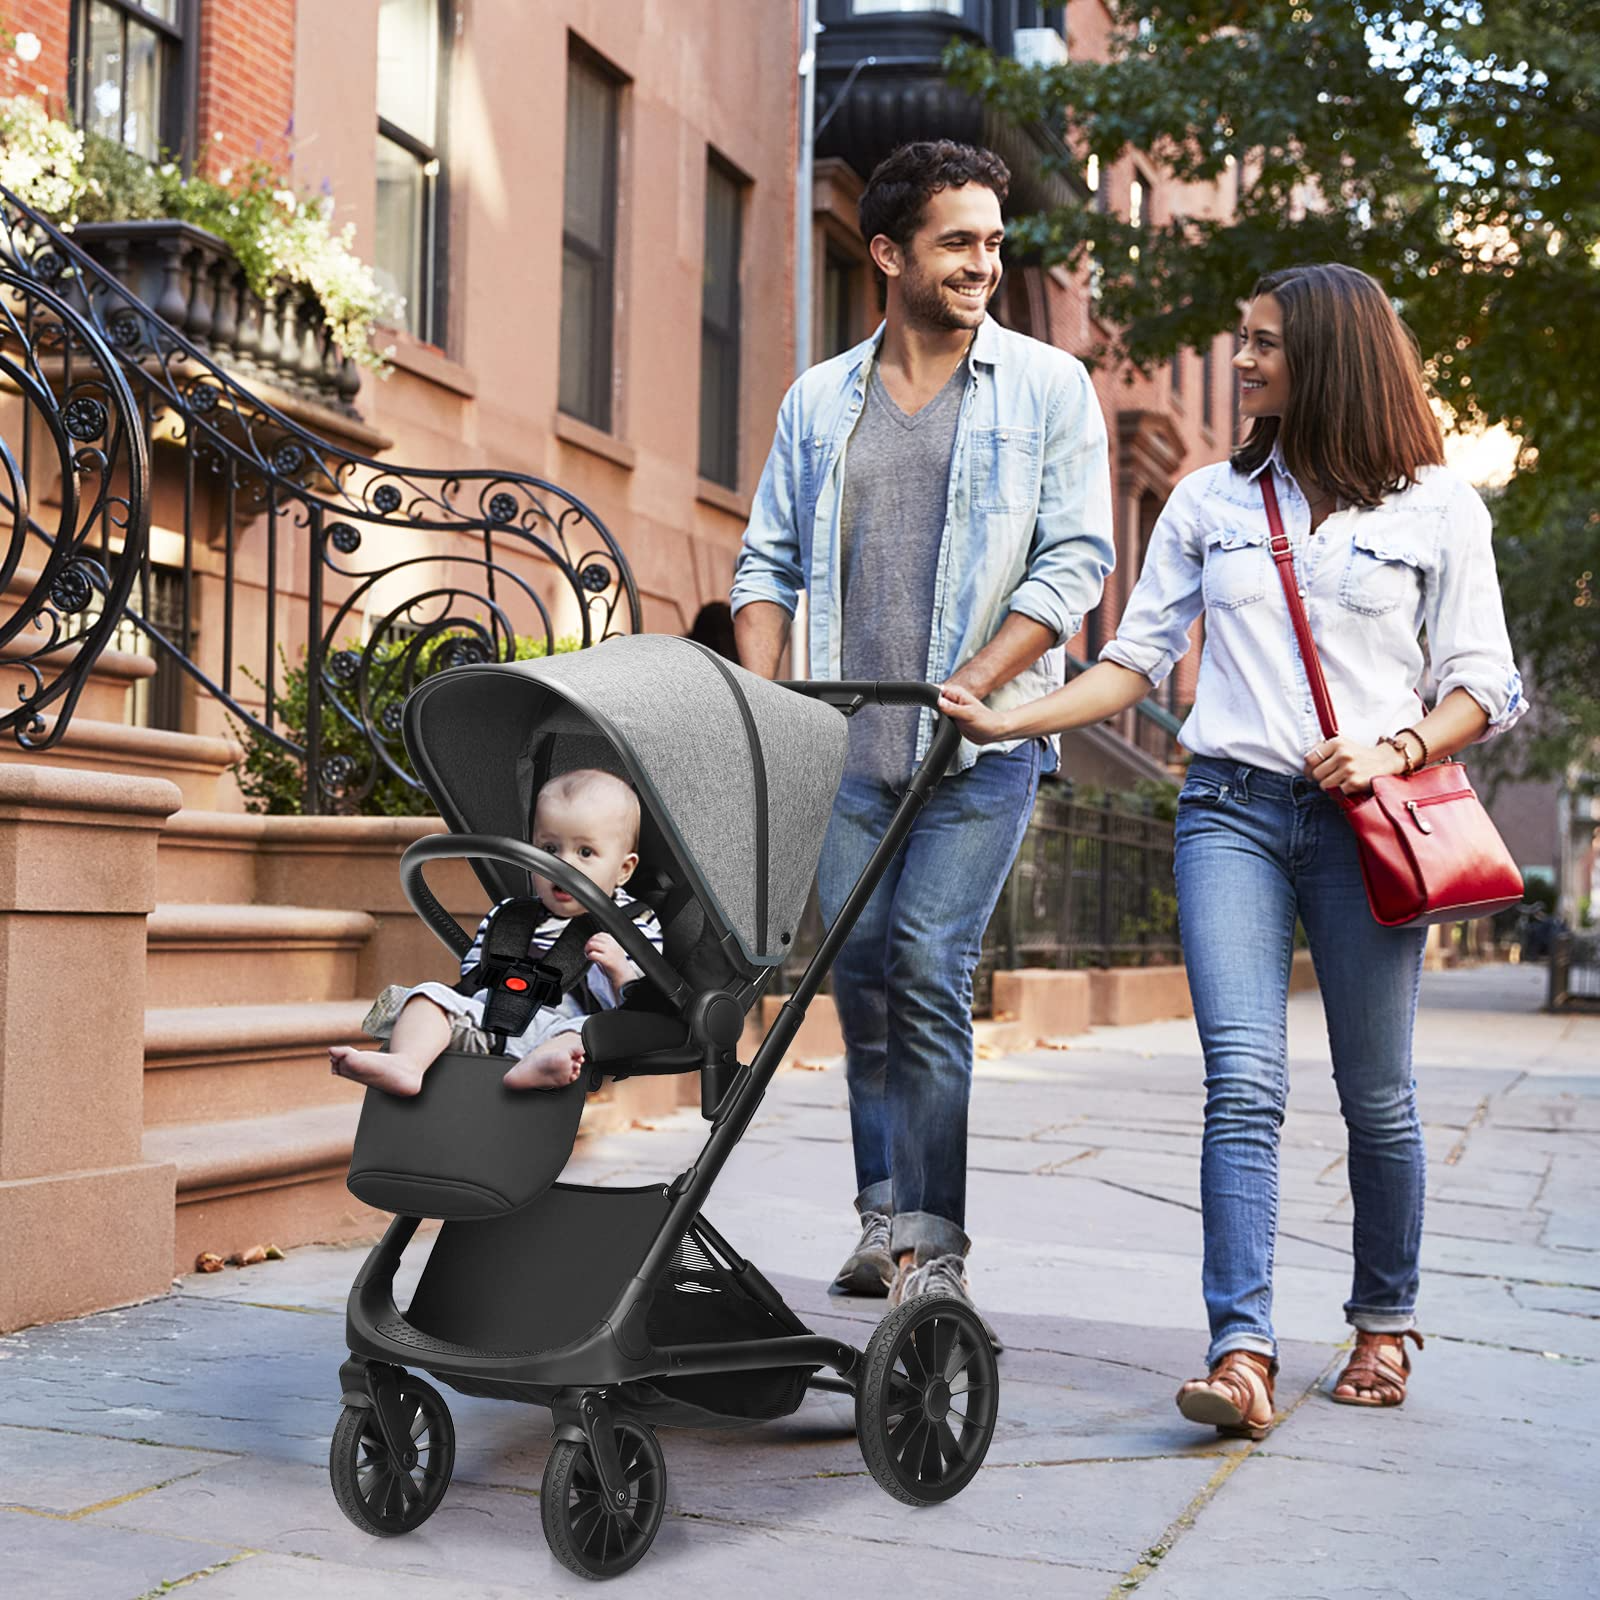 INFANS Lightweight Baby Stroller, Compact Stroller with One-Hand